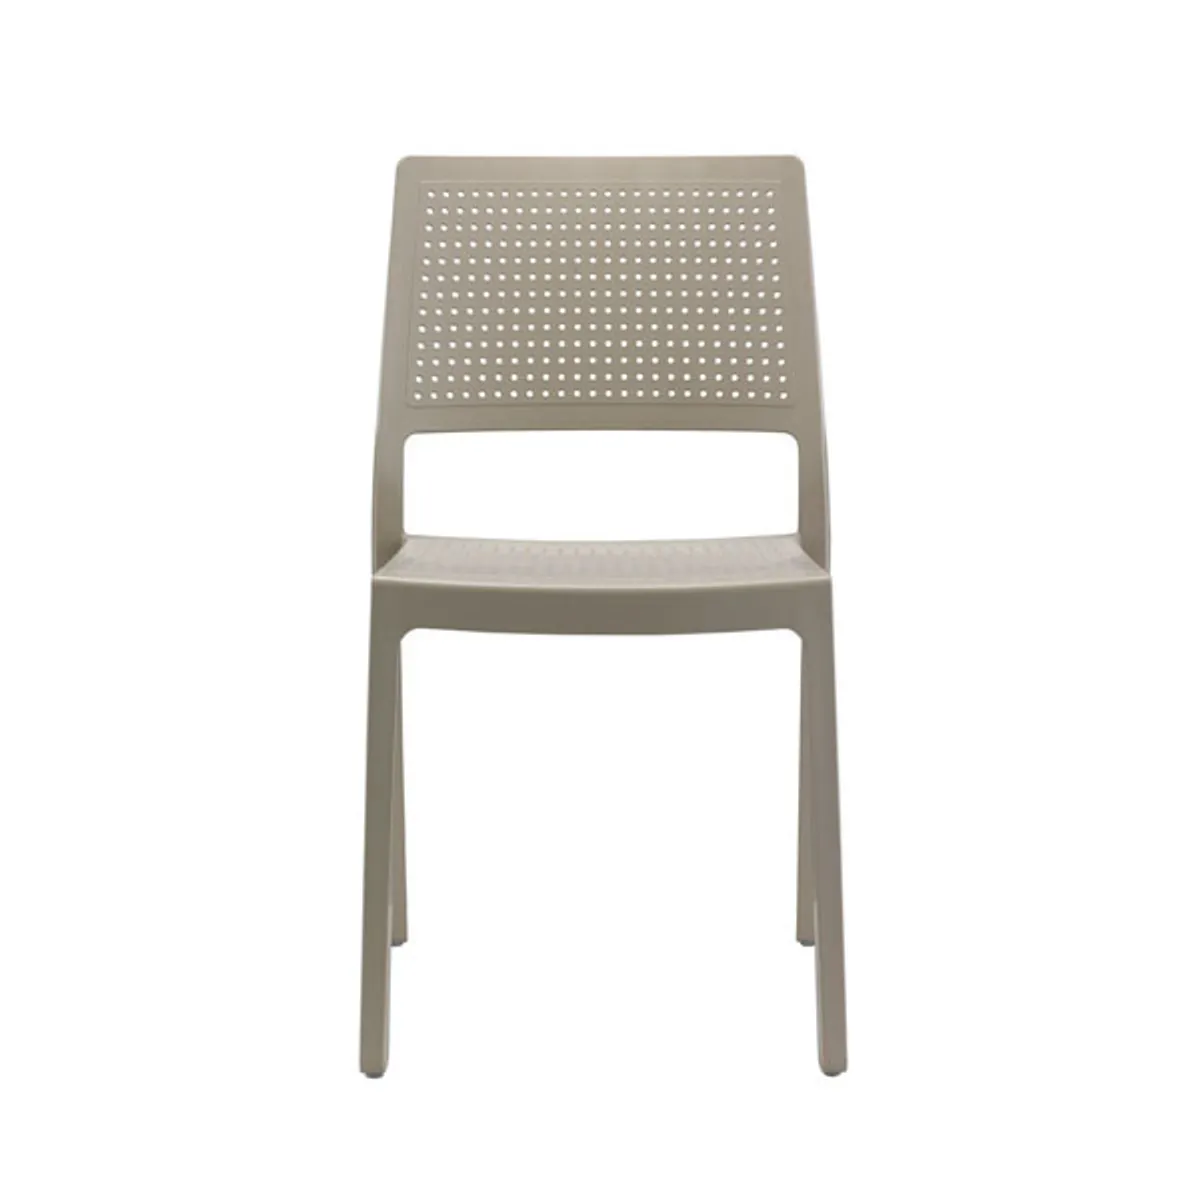 Remi dot side chair 5 Inside Out Contracts